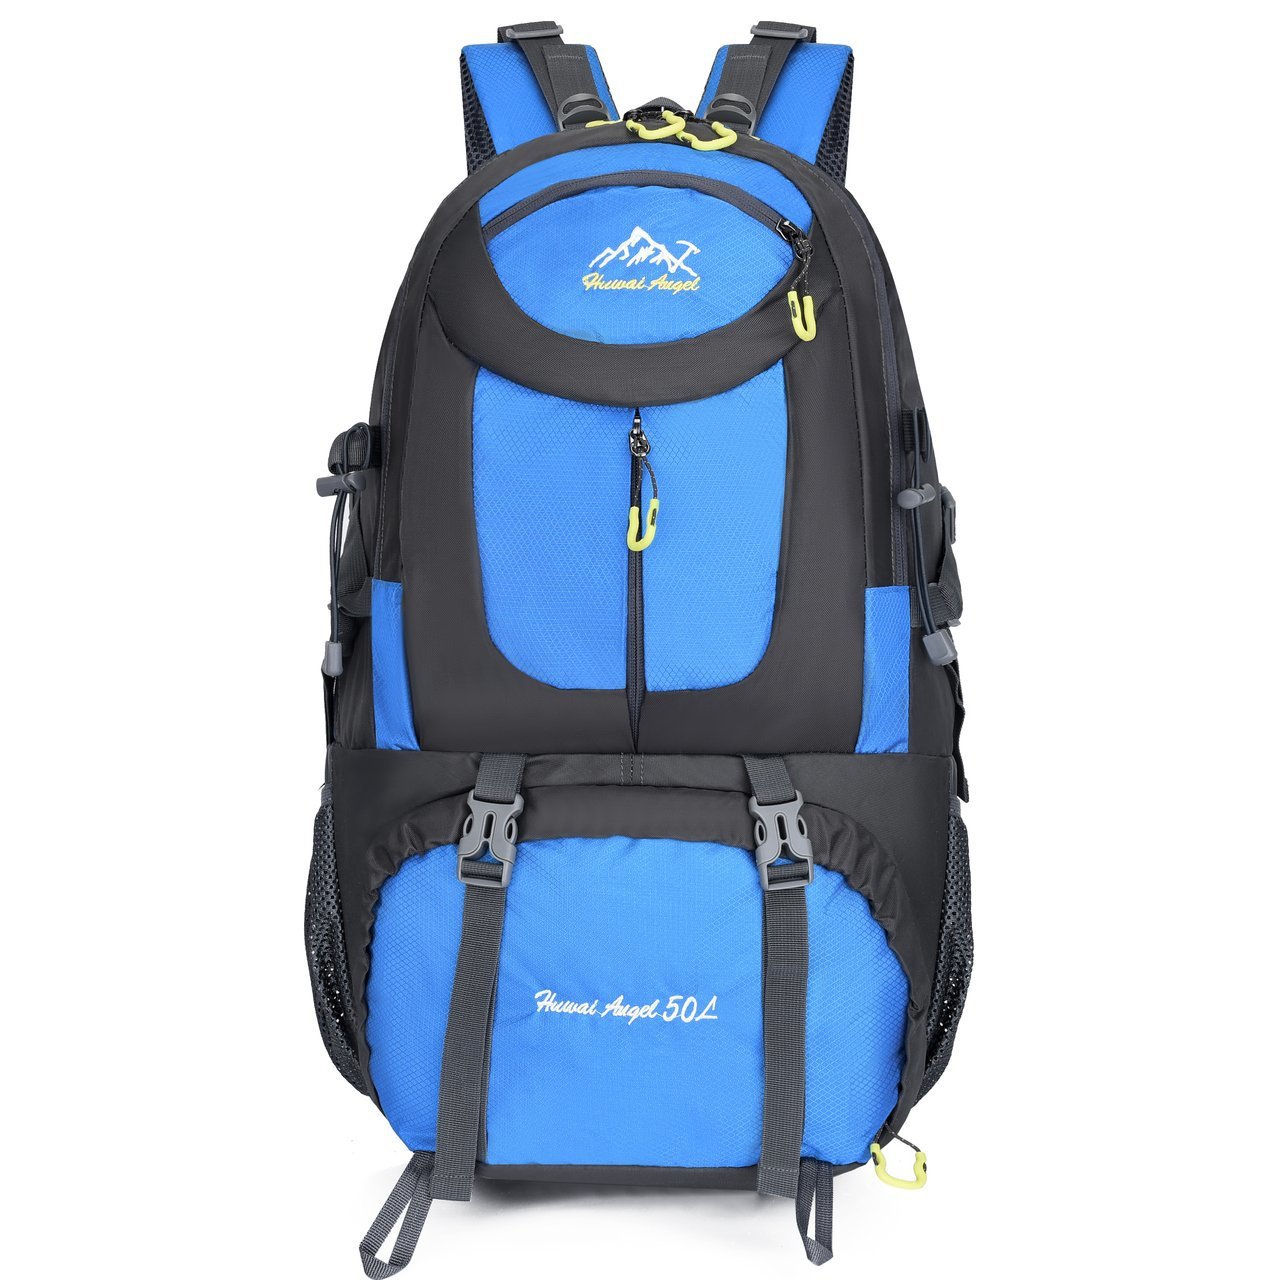 skyblue outdoor sports trekking hiking travel bags backpack